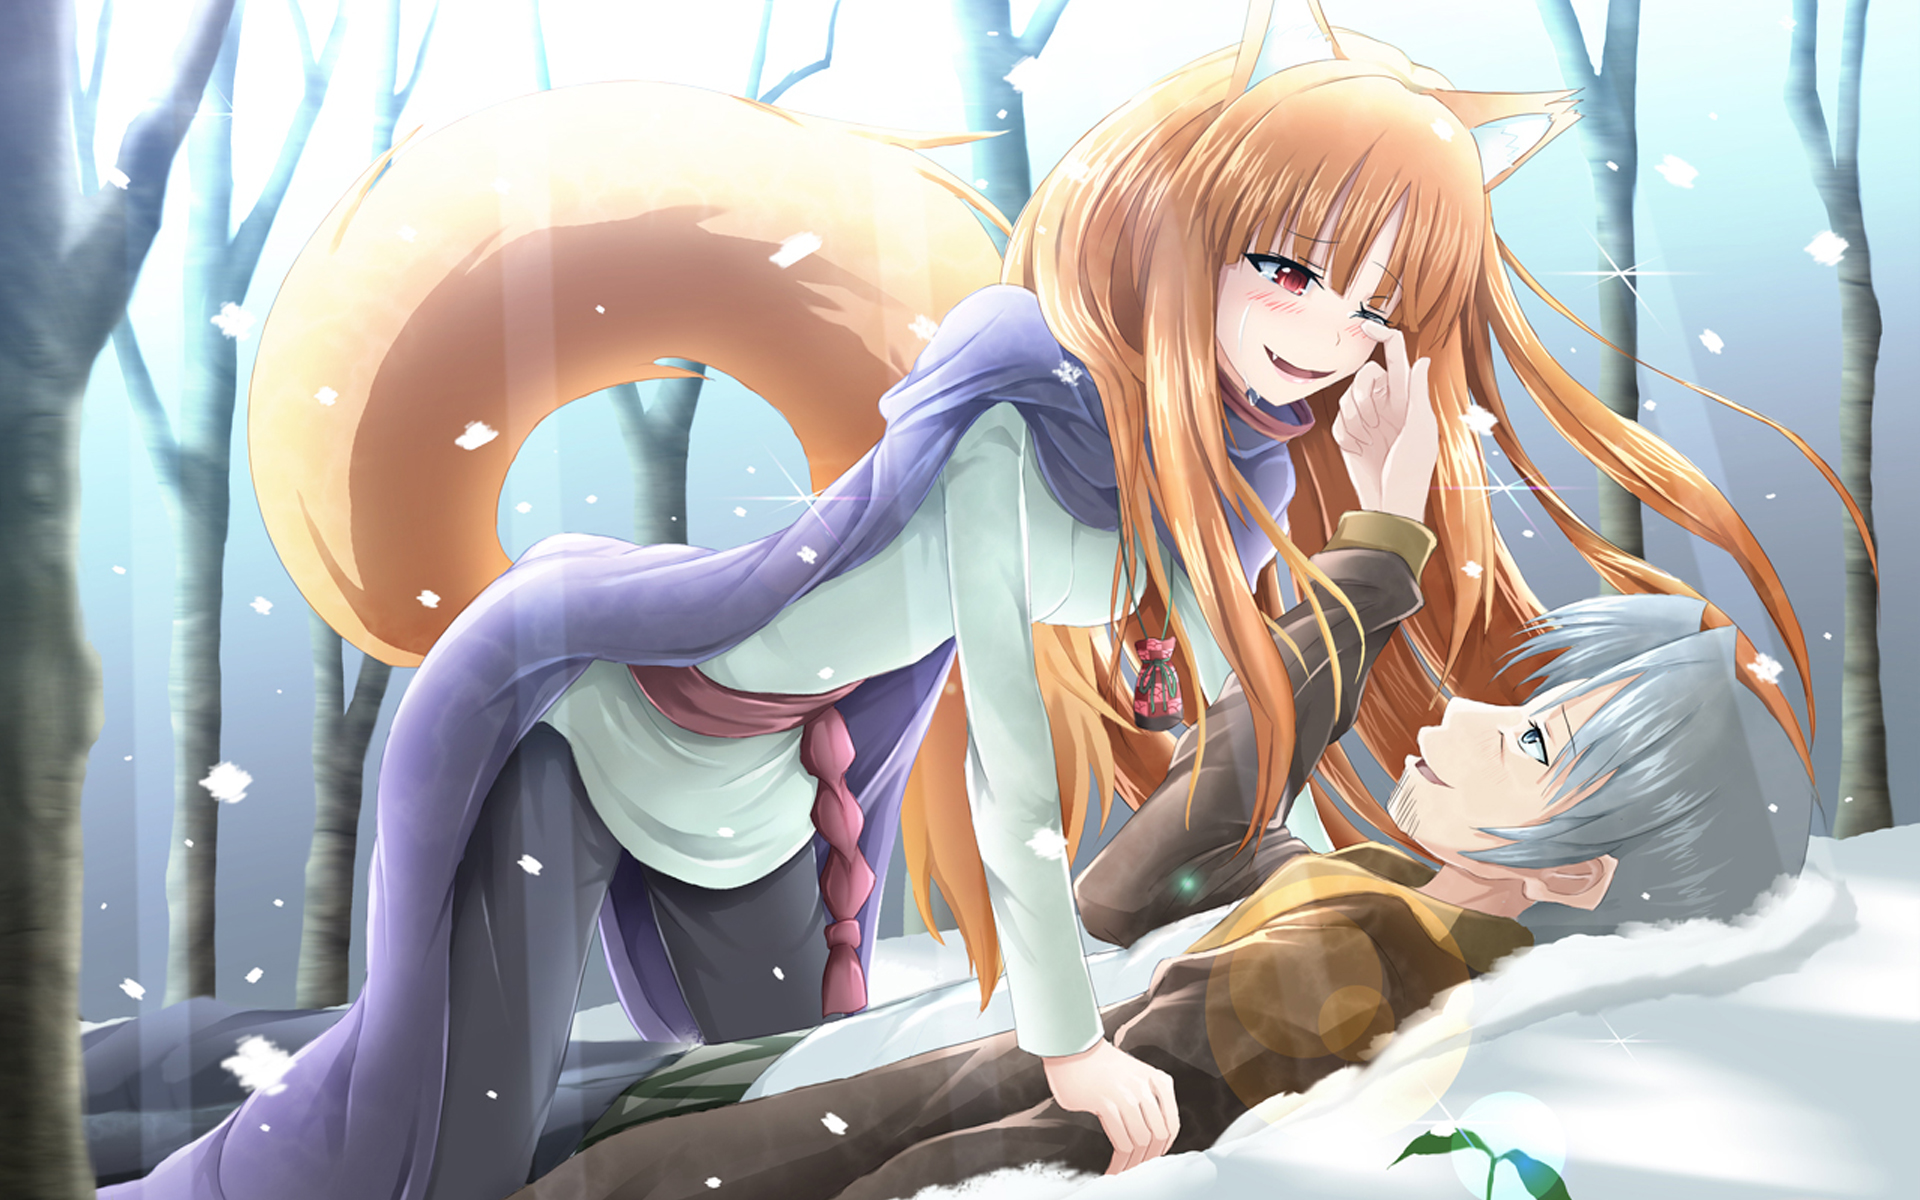 tails, winter, Spice and Wolf, animal ears, Craft Lawrence, Holo The Wise Wolf, inumimi - desktop wallpaper